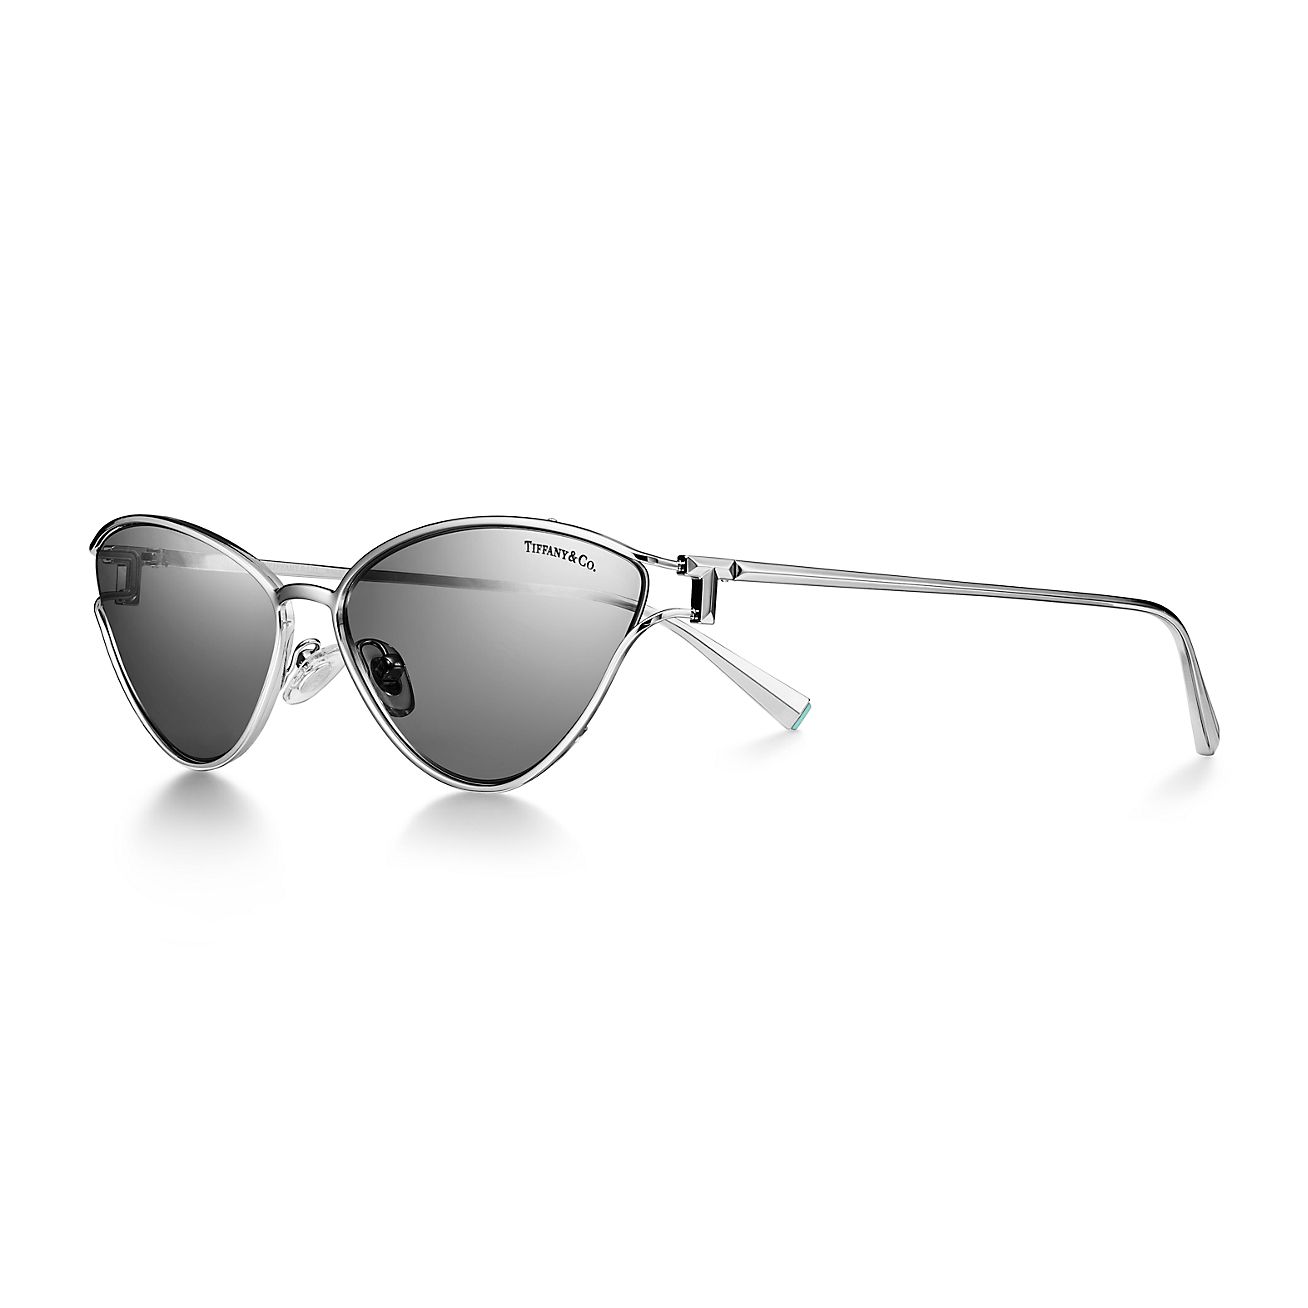 Tiffany T Sunglasses in Silver-colored Metal with Light Gray Mirrored  Lenses | Tiffany & Co.